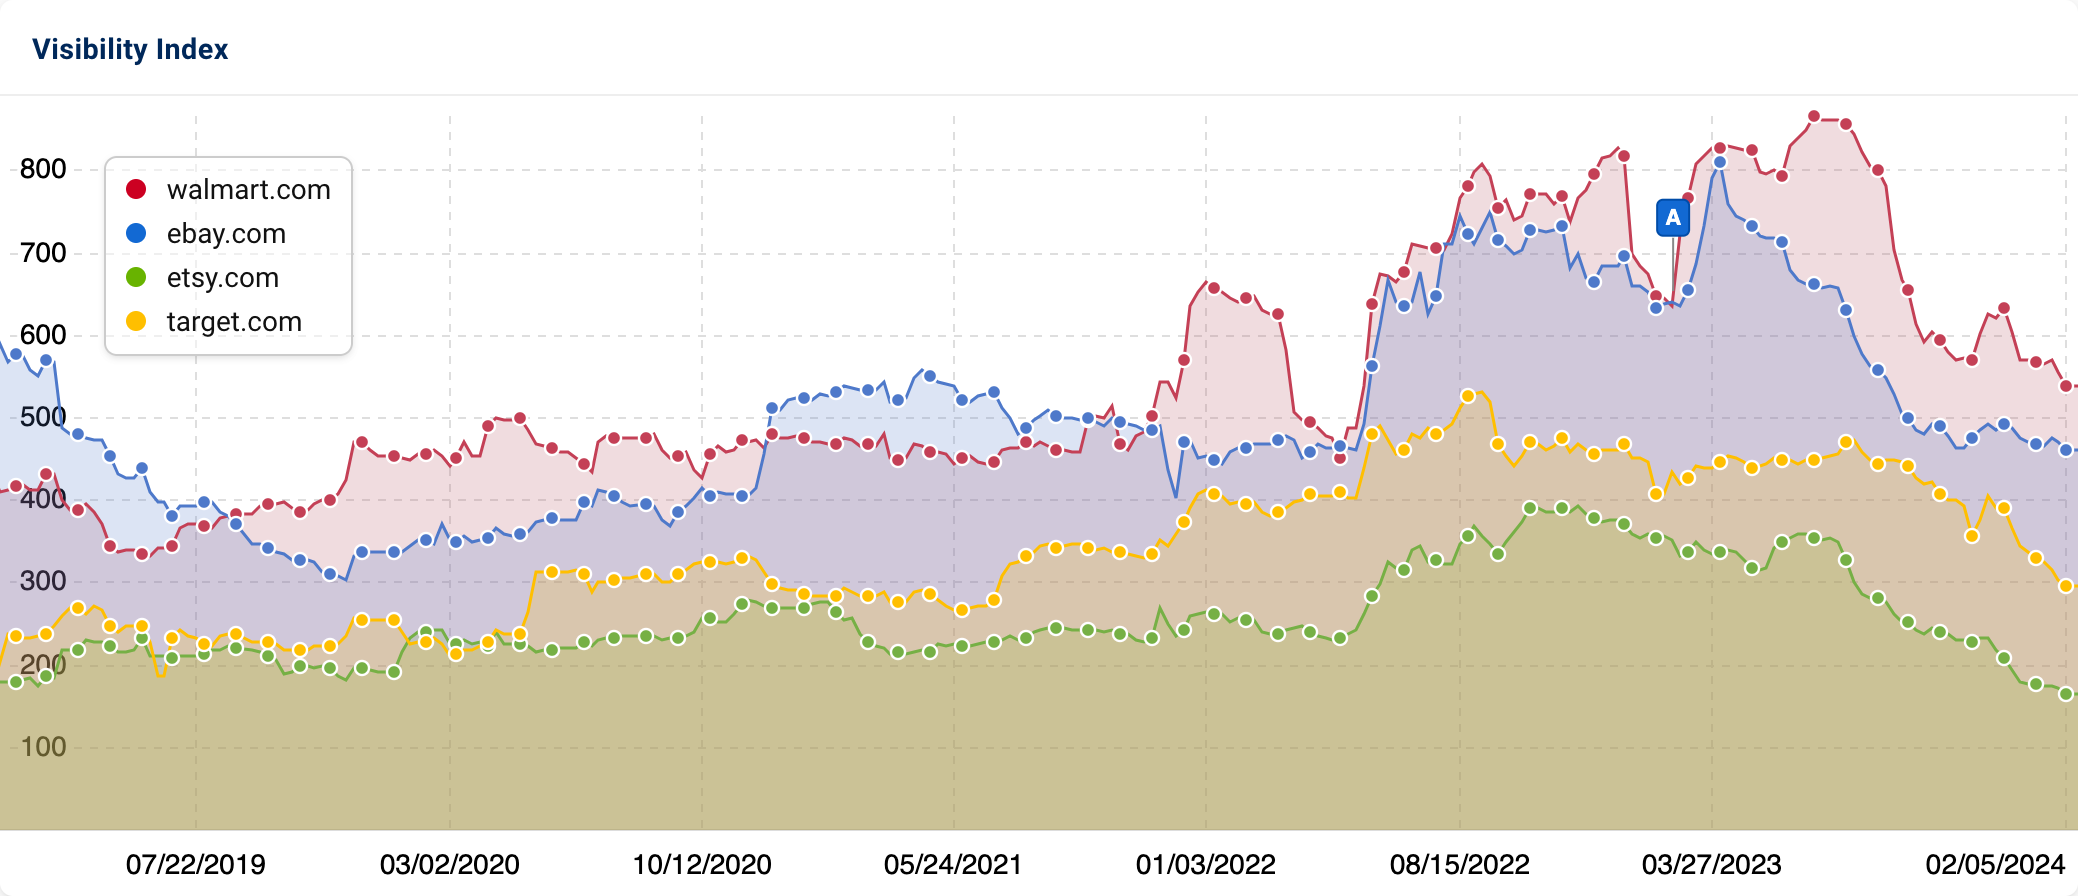 The comparison of the Visibility Index of the domains walmart.com, ebay.com, etsy.com and target.com. The February 2023 Product Reviews Update is marked with the pin "A".